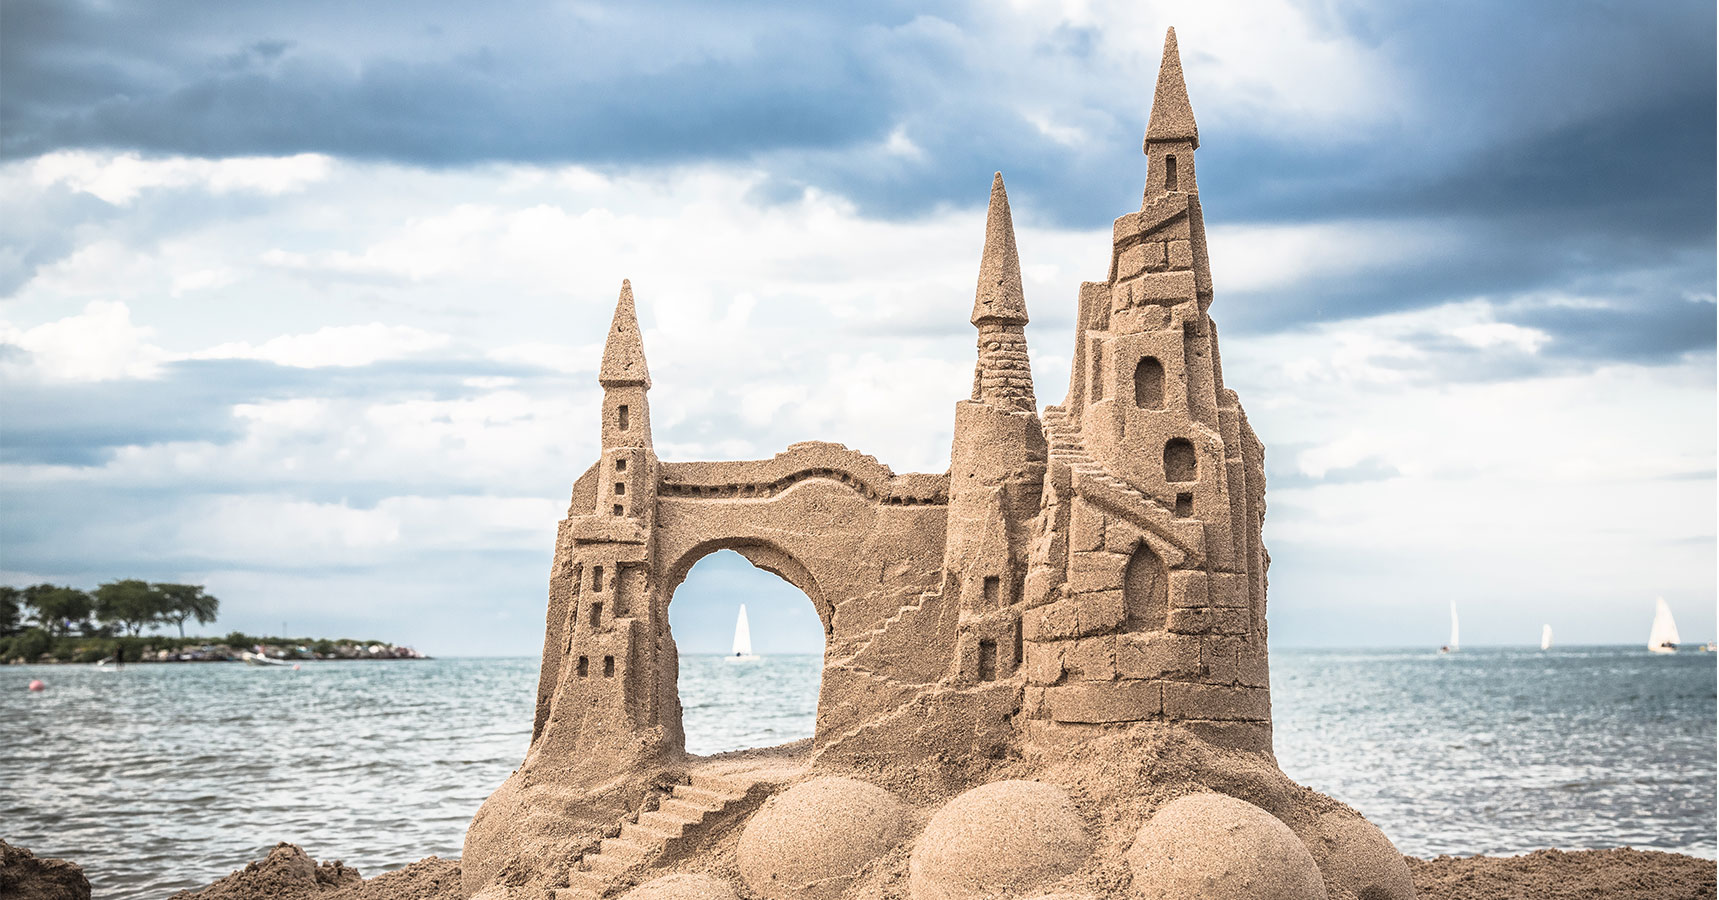 Castles in the Sand: Building a New Life to Find Happiness